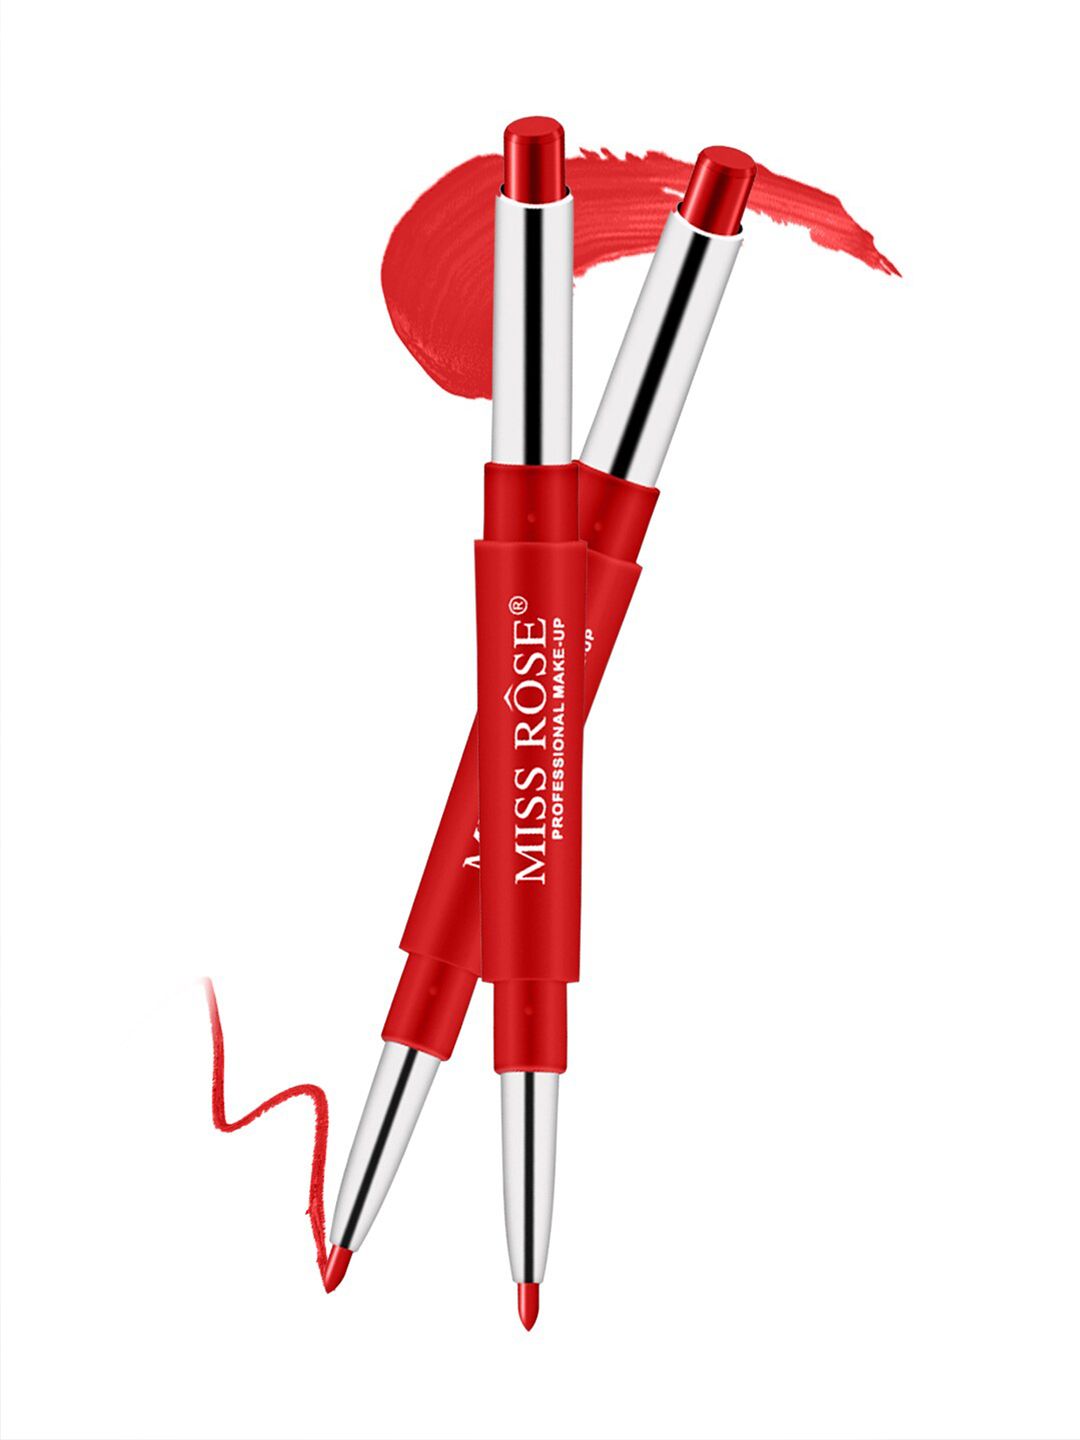 MISS ROSE 2 In 1 CreamyMatte Lipstick - Flame Price in India